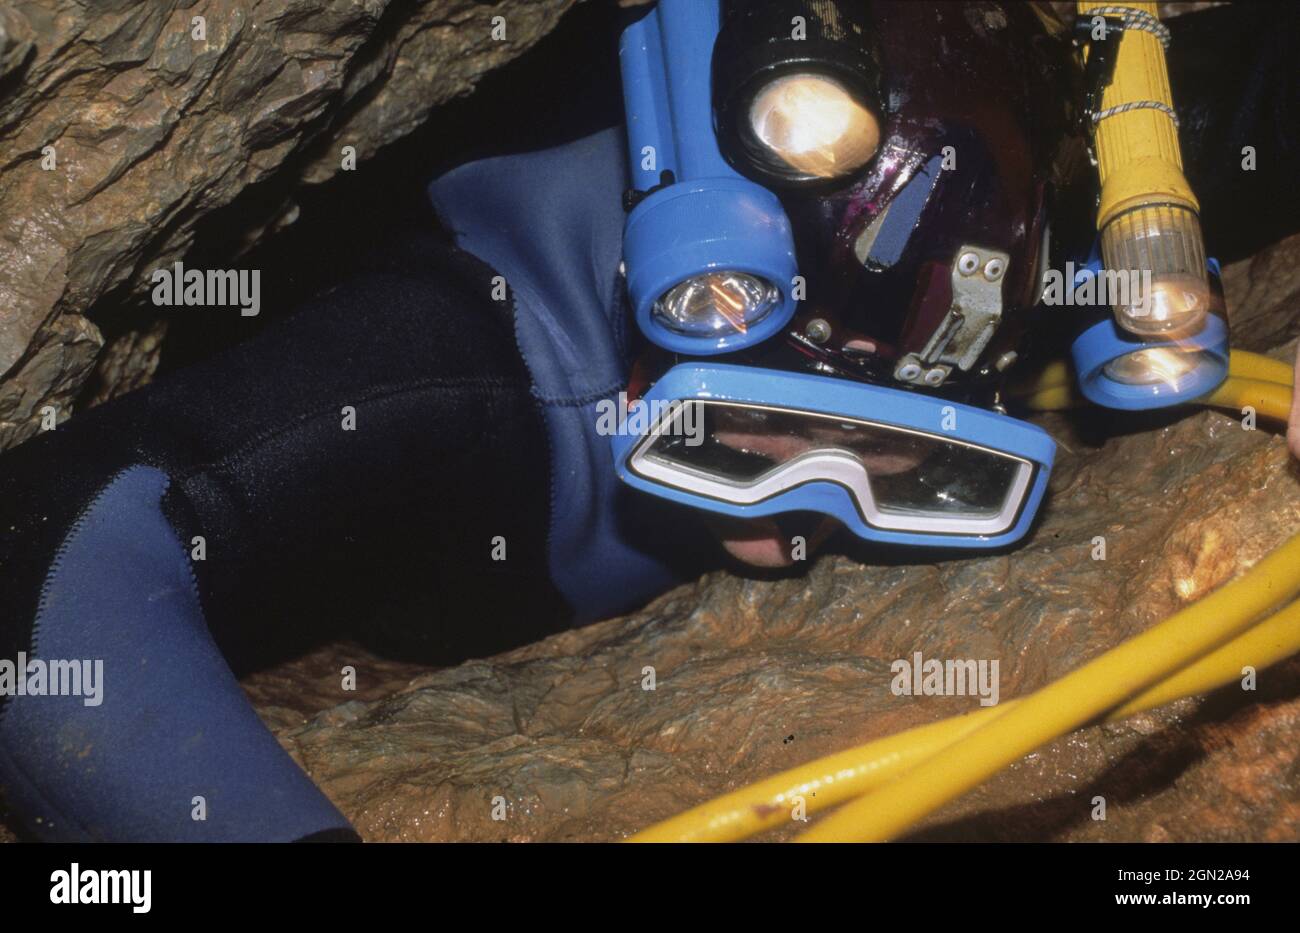 Diver exiting McCavity Cave. The tight passage into and out of the flooded McCavity is via this tight restriction called the Birth Canal. Wellington C Stock Photo